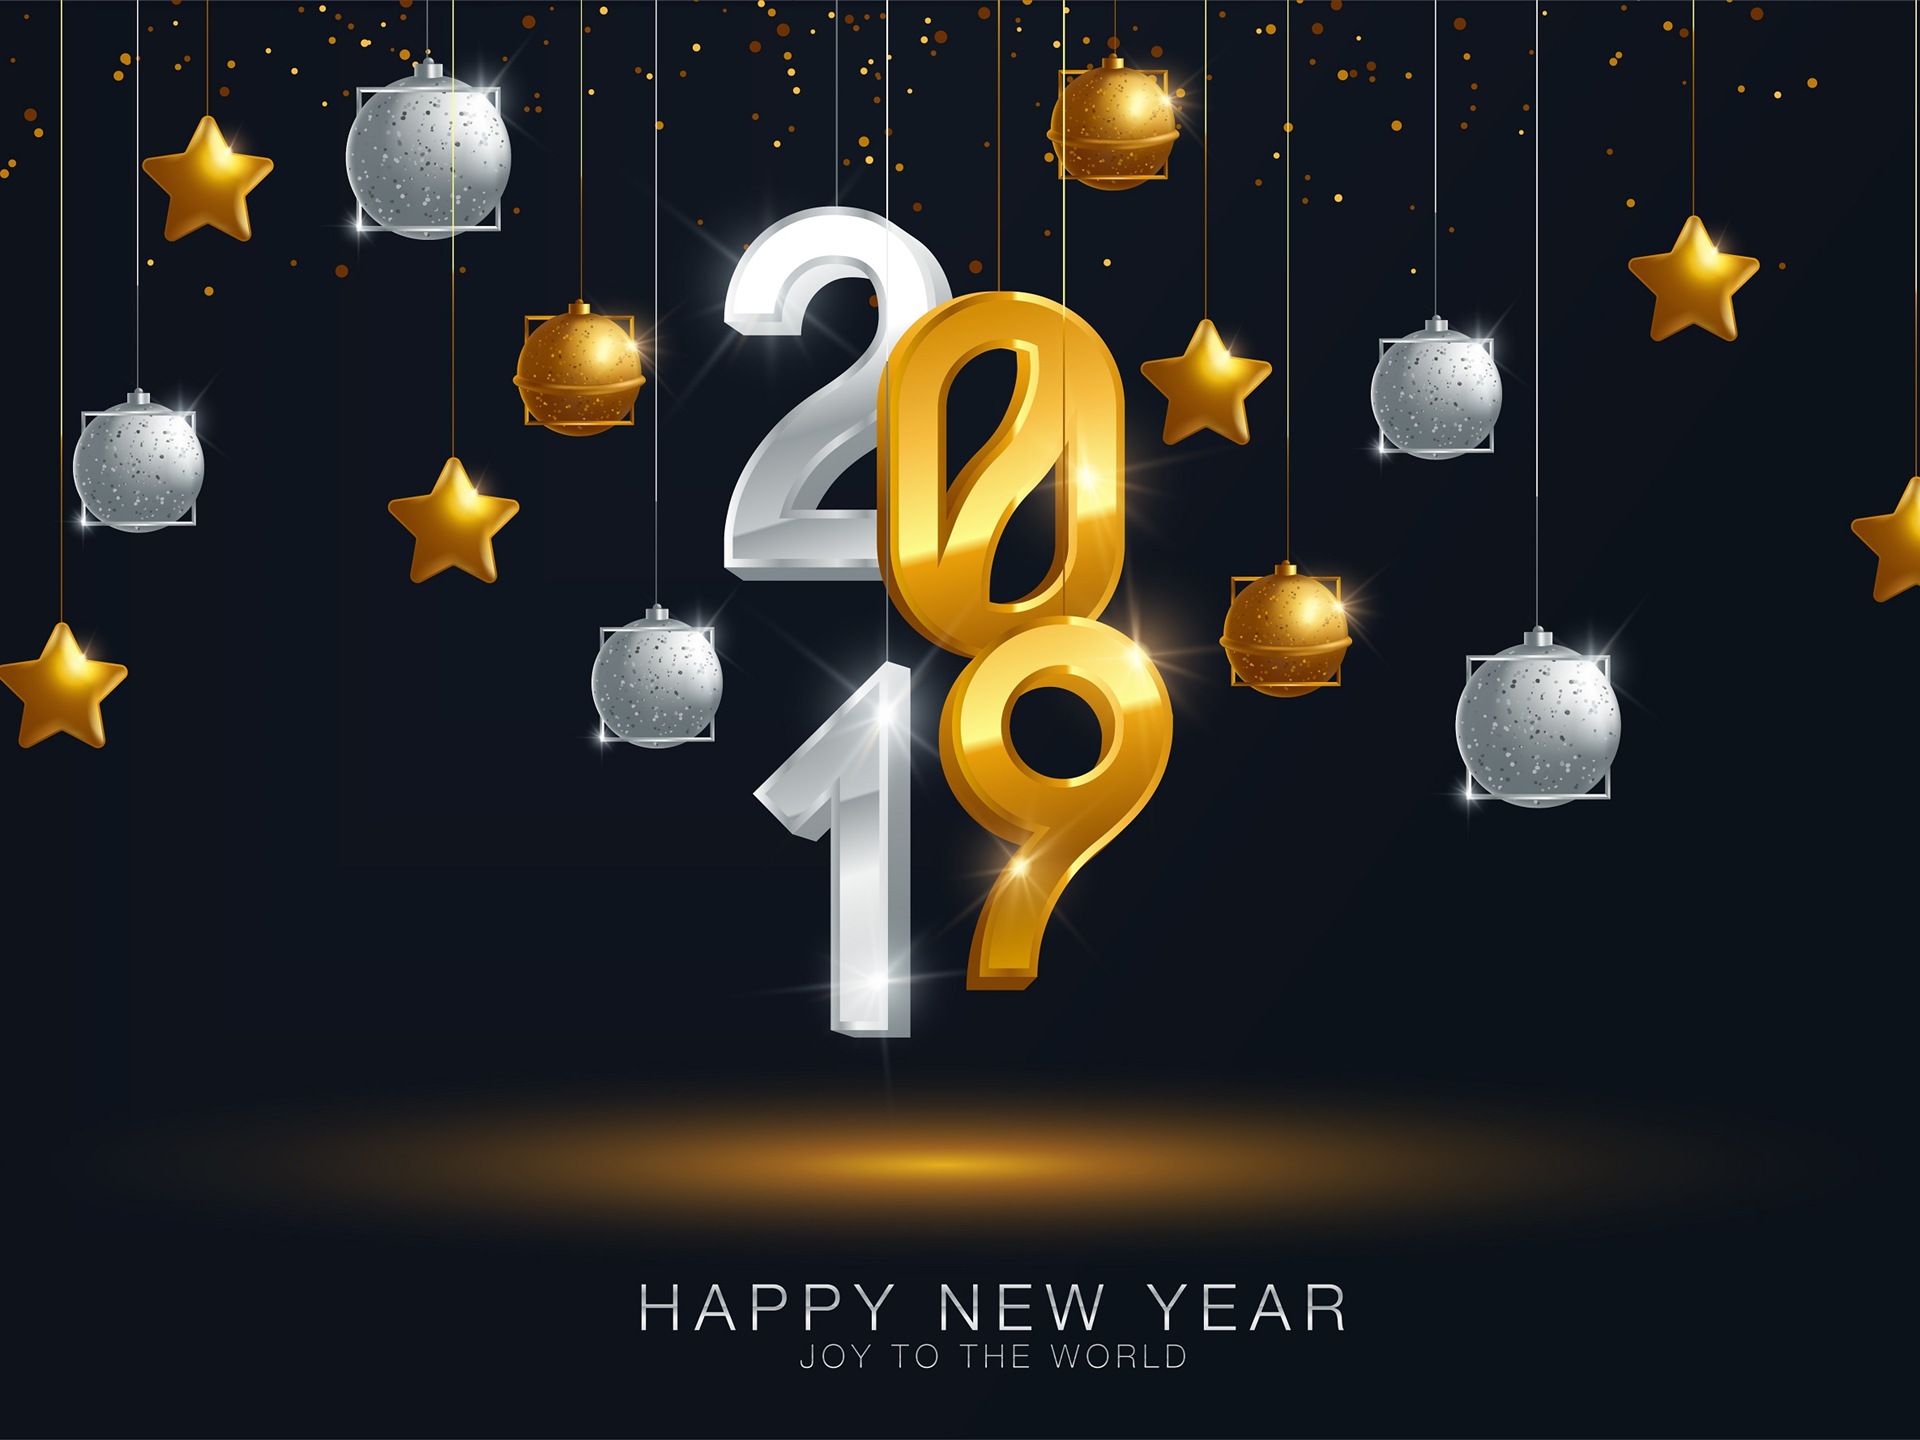 Happy New Year 2019 HD wallpapers #12 - 1920x1440